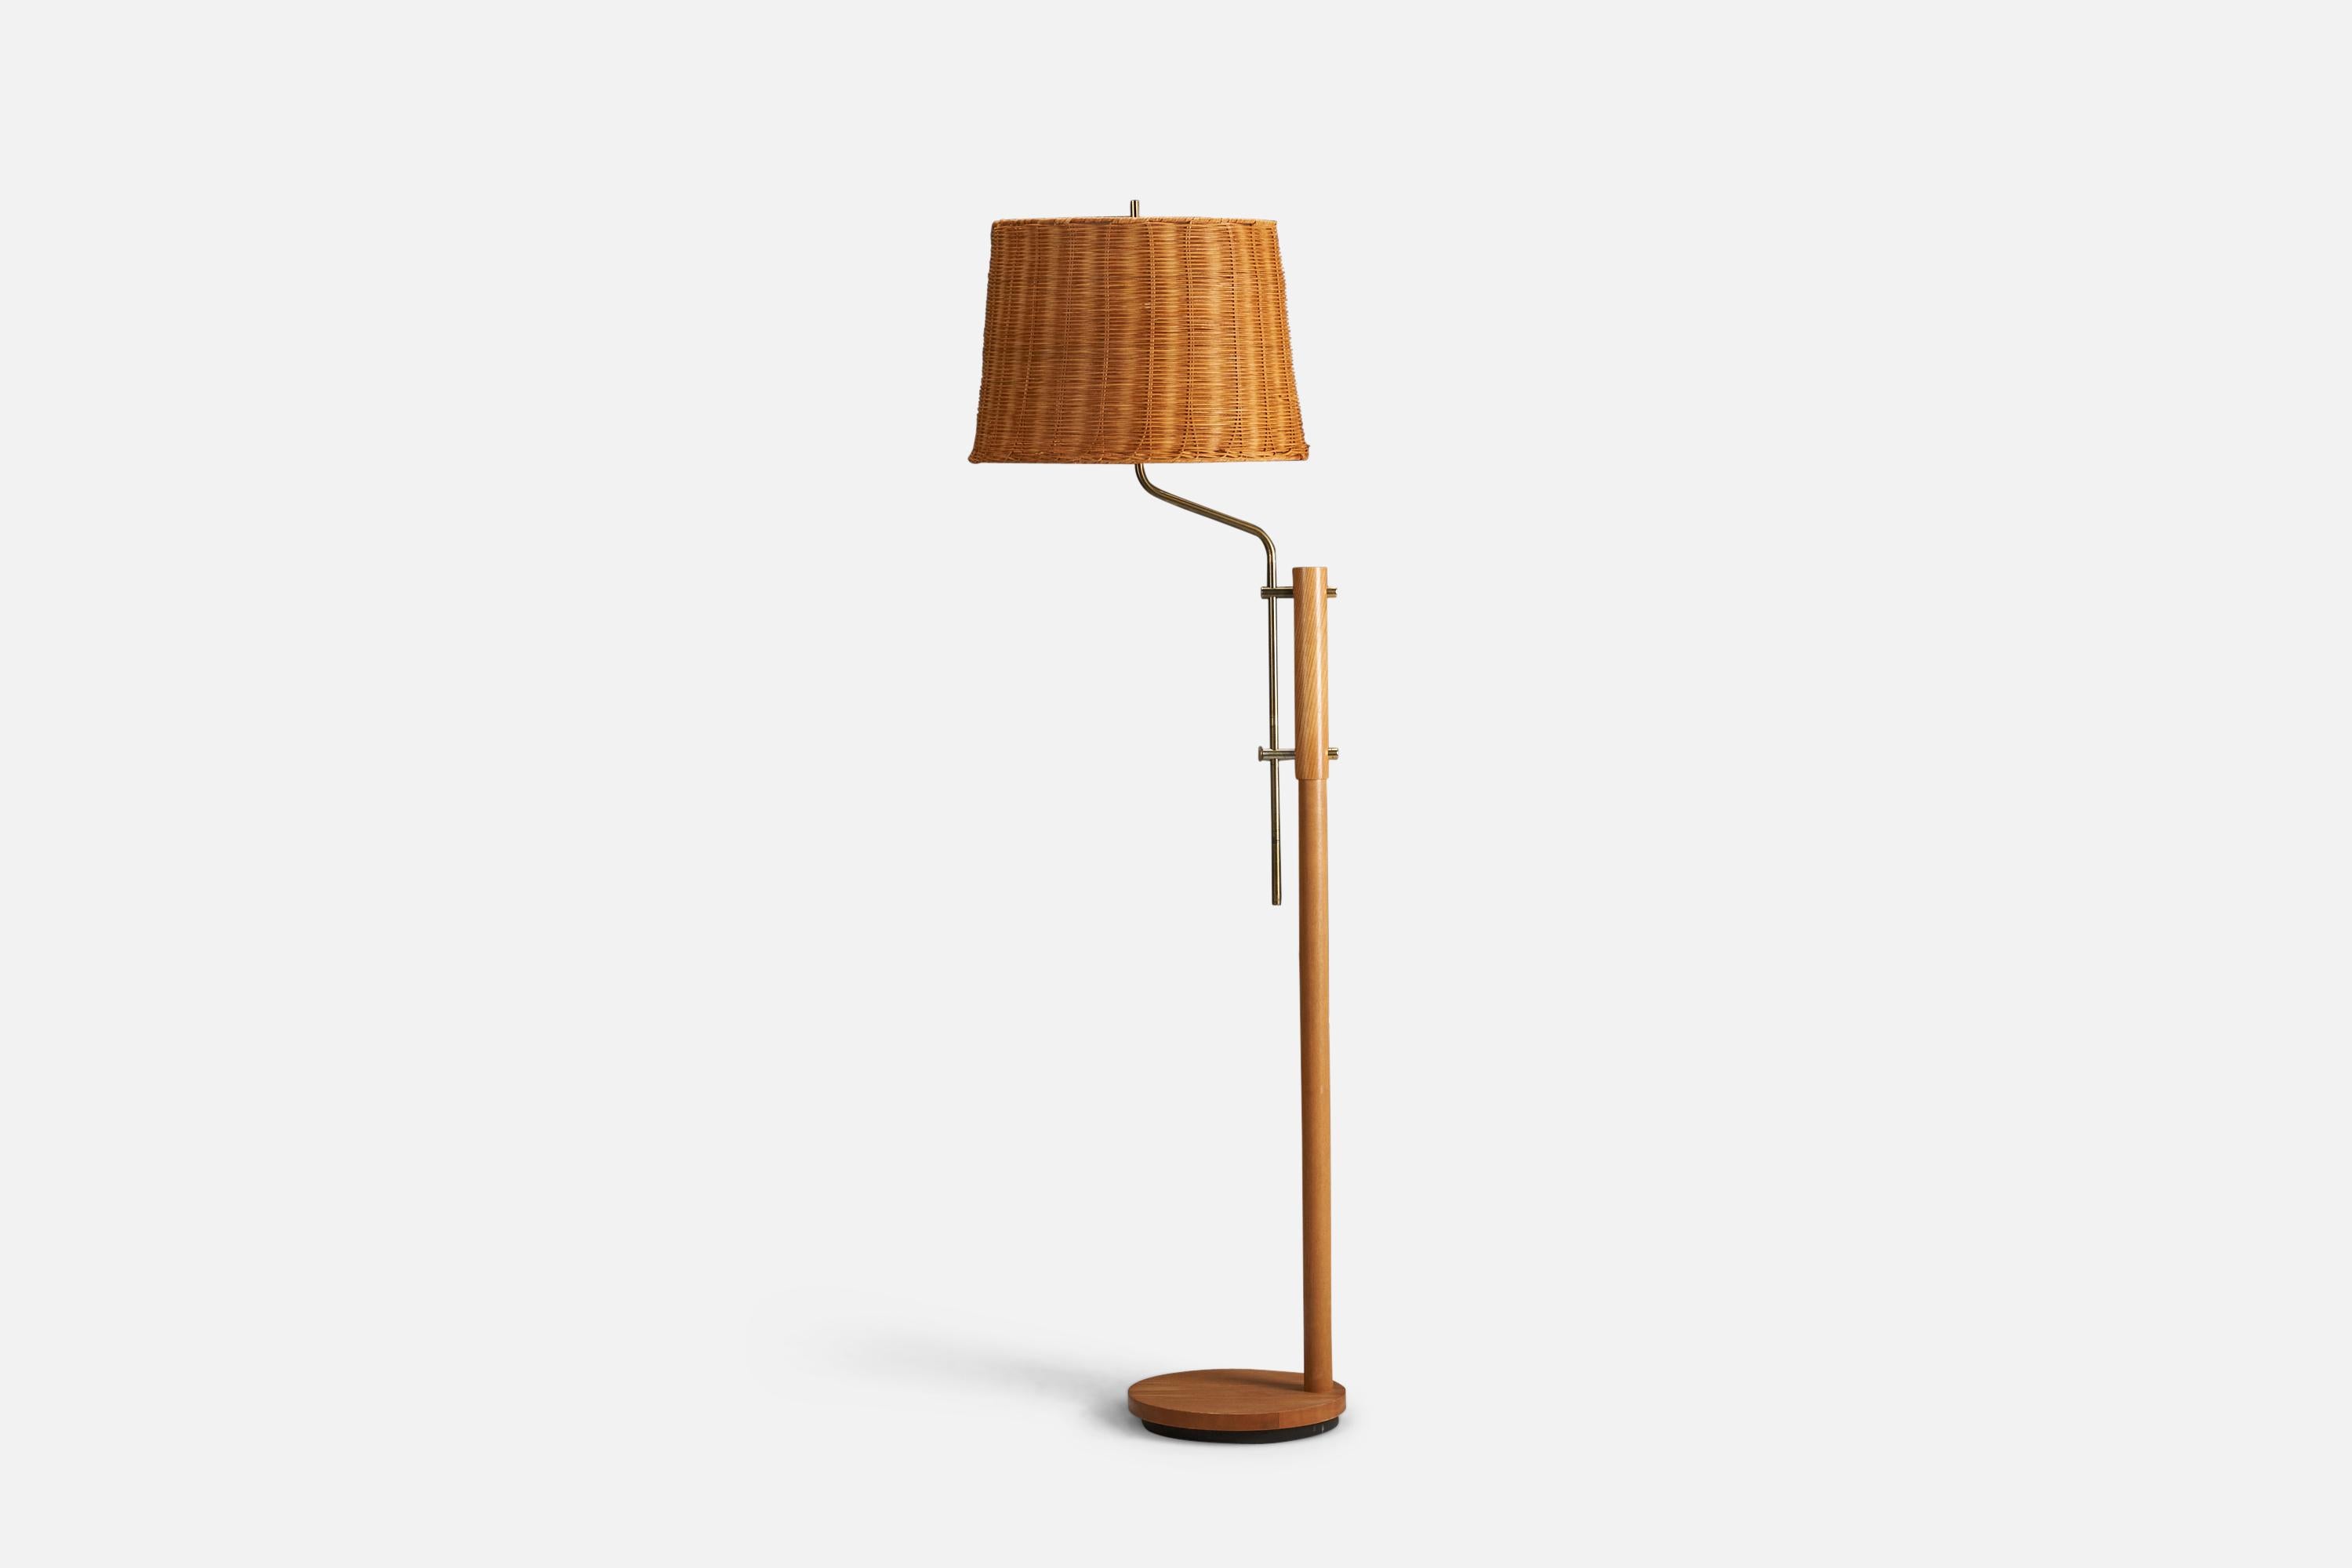 A oak, brass and rattan floor lamp designed and produced by a Swedish Designer, Sweden, 1970s.

Sockets take standard E-26 medium base bulbs.

There is no maximum wattage stated on the fixture.